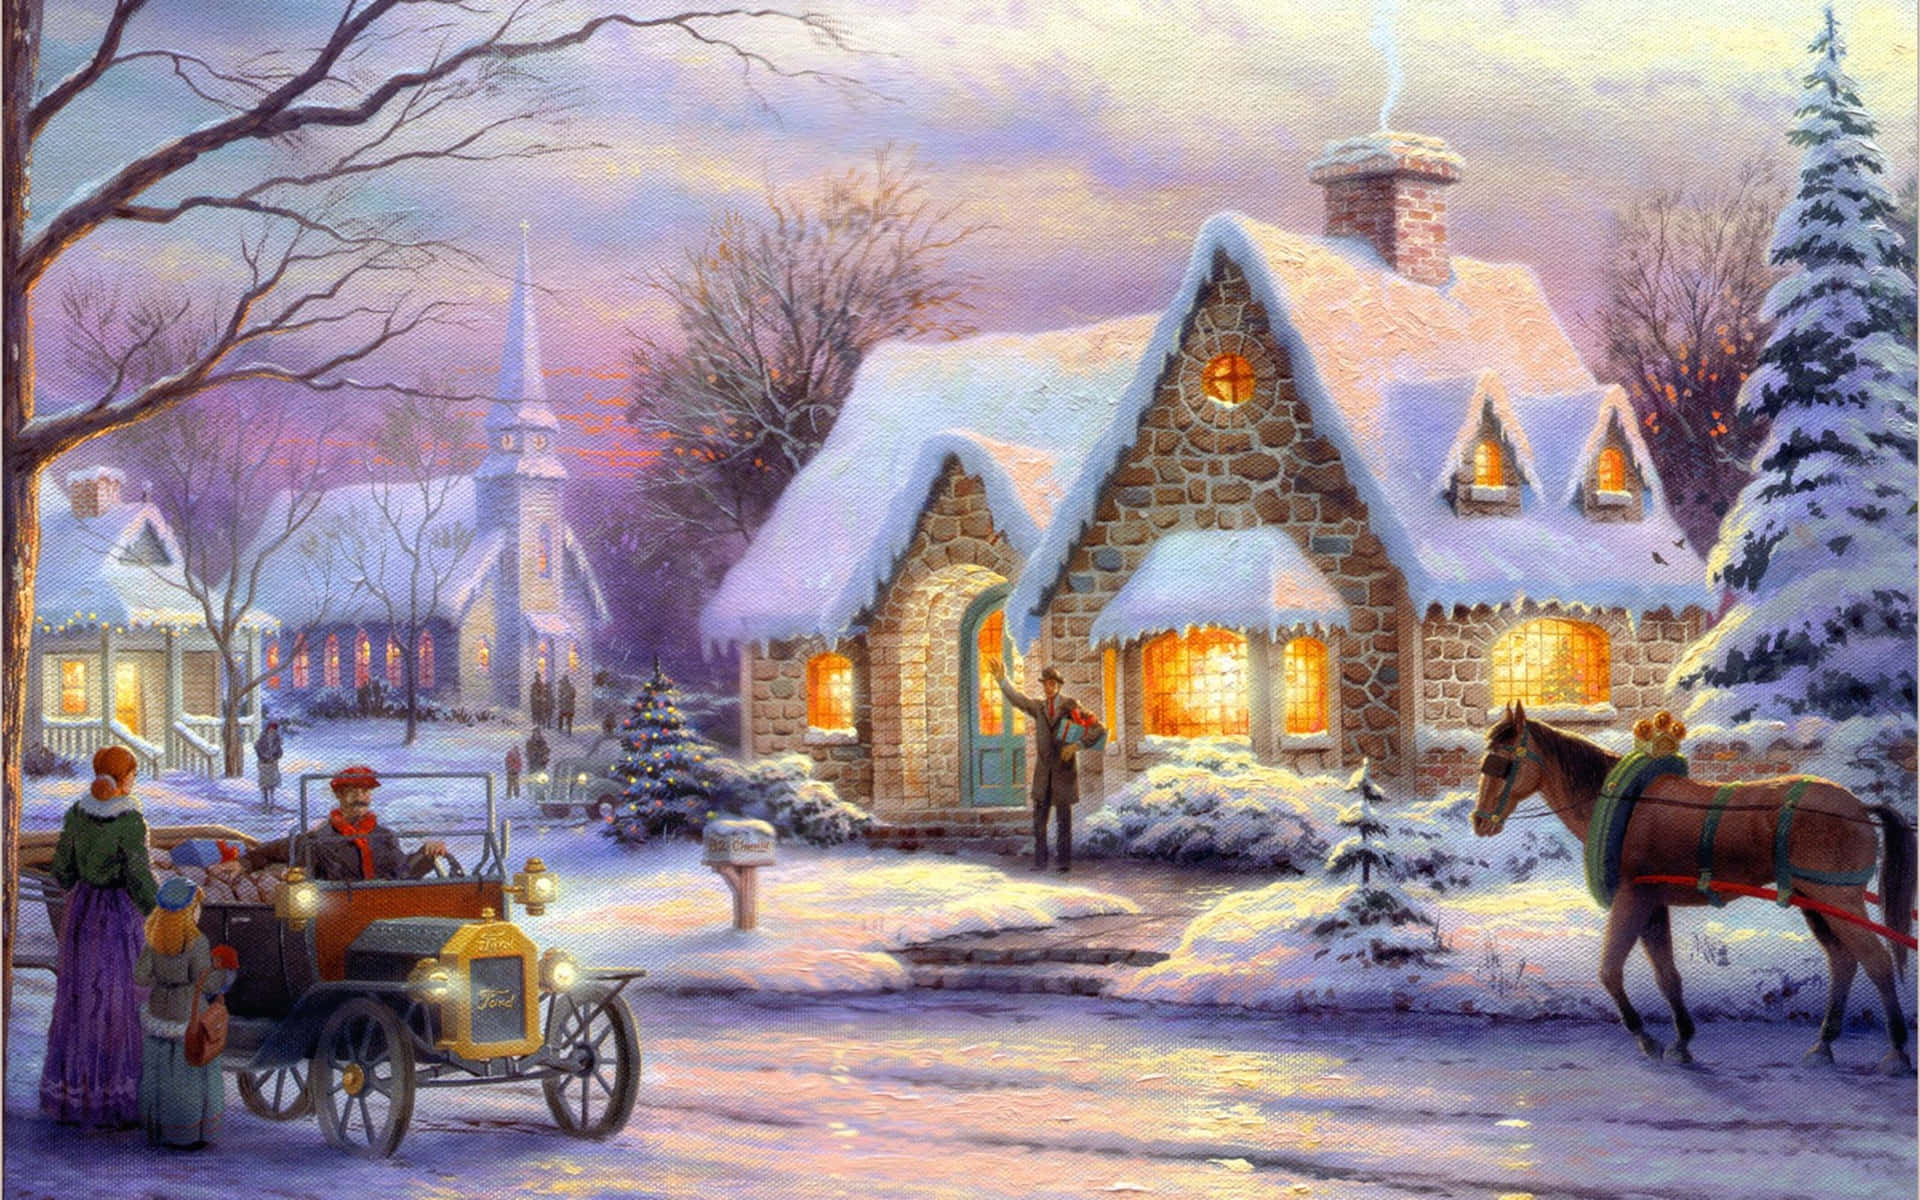 Enjoy the spirited holiday ambiance of a traditional Christmas village Wallpaper